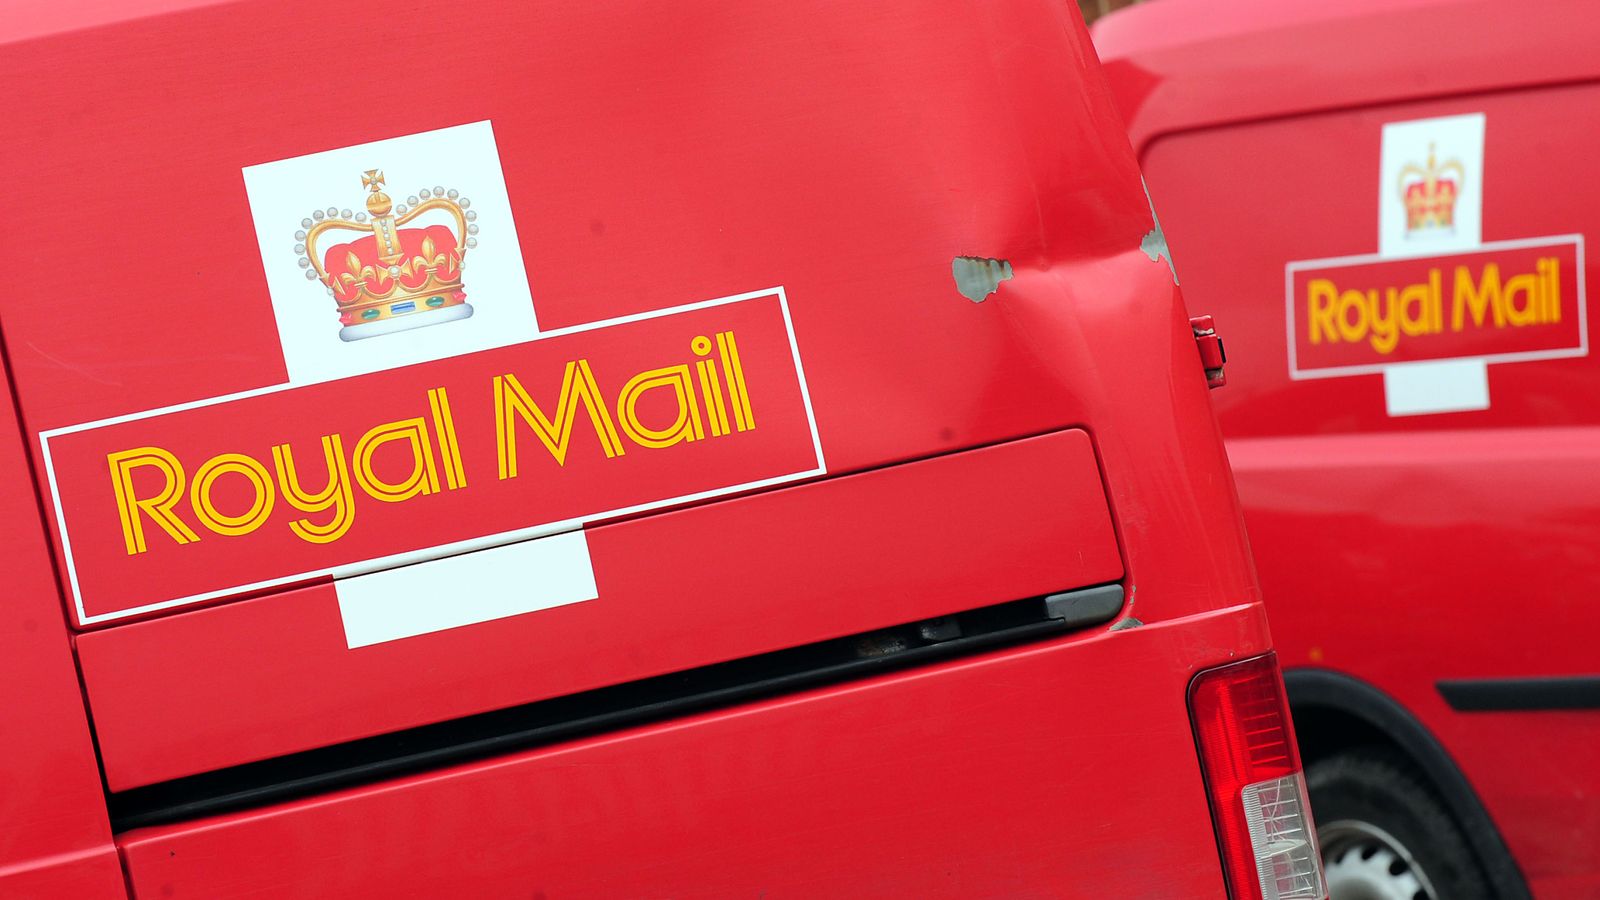 Estimated 15.7 million people hit by postal delays charity says, as it calls for tougher review into Royal Mail